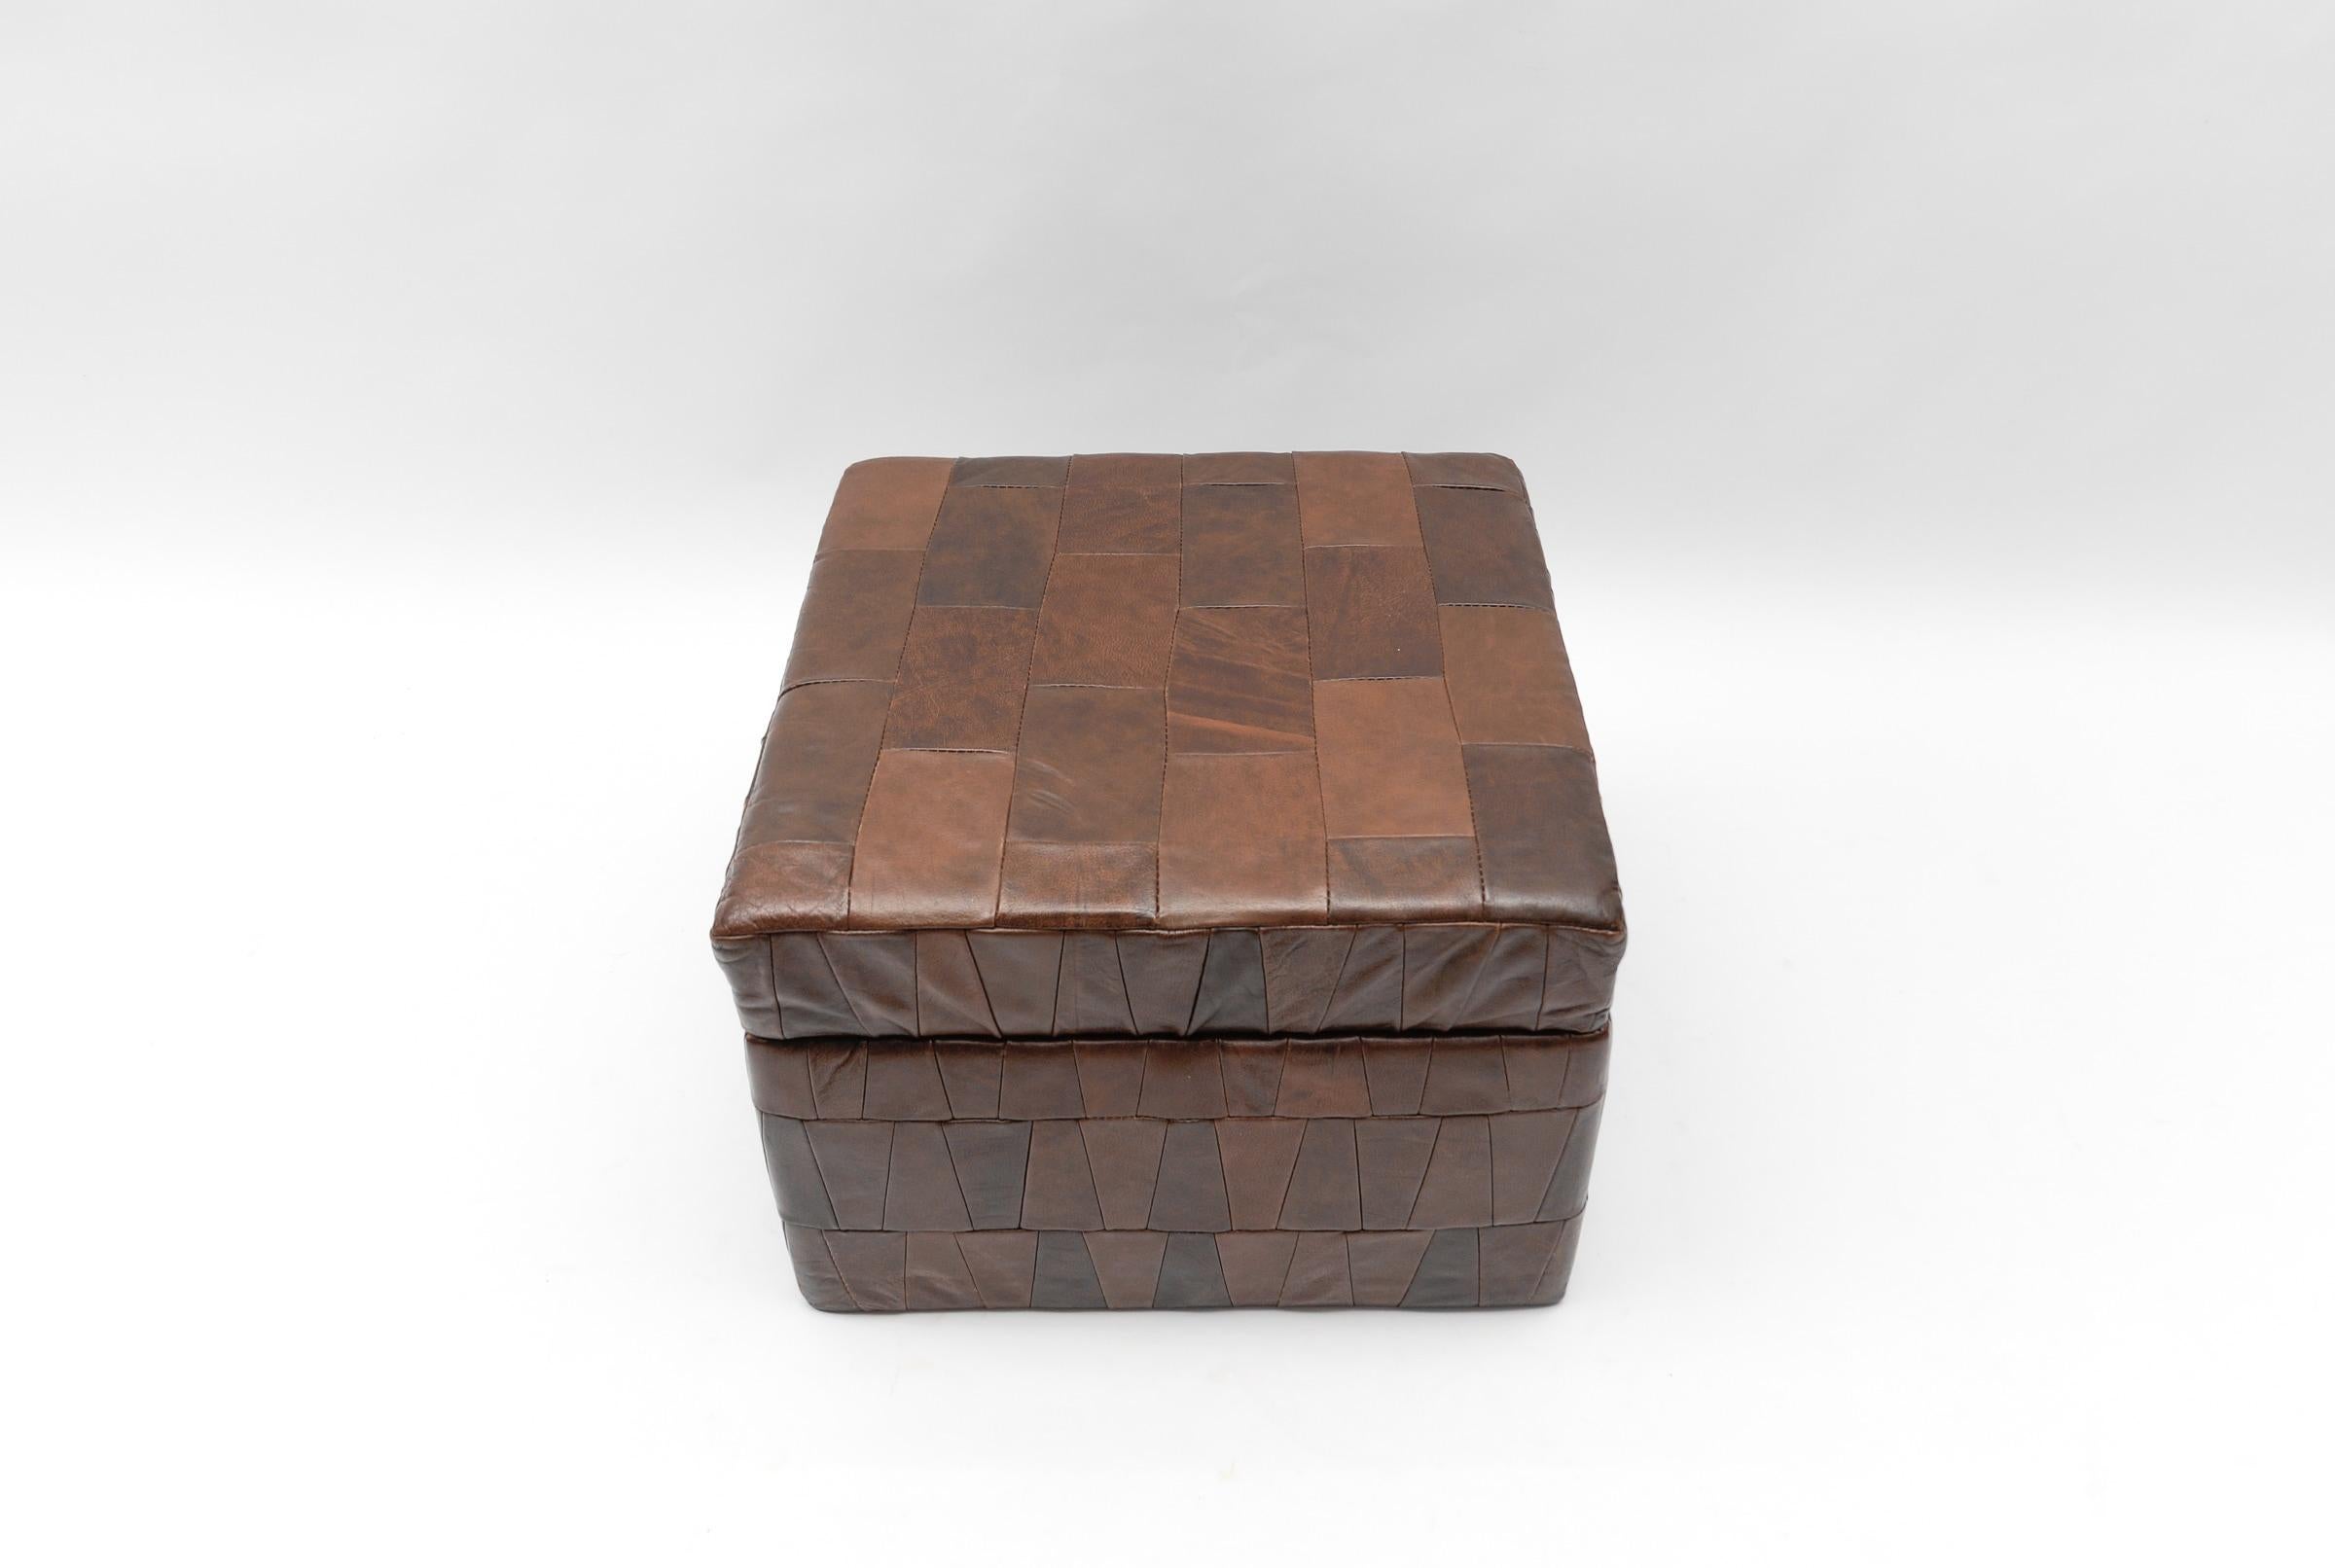 Late 20th Century Choco Brown Leather Patchwork Pouf with Storage Space from De Sede, 1960s For Sale